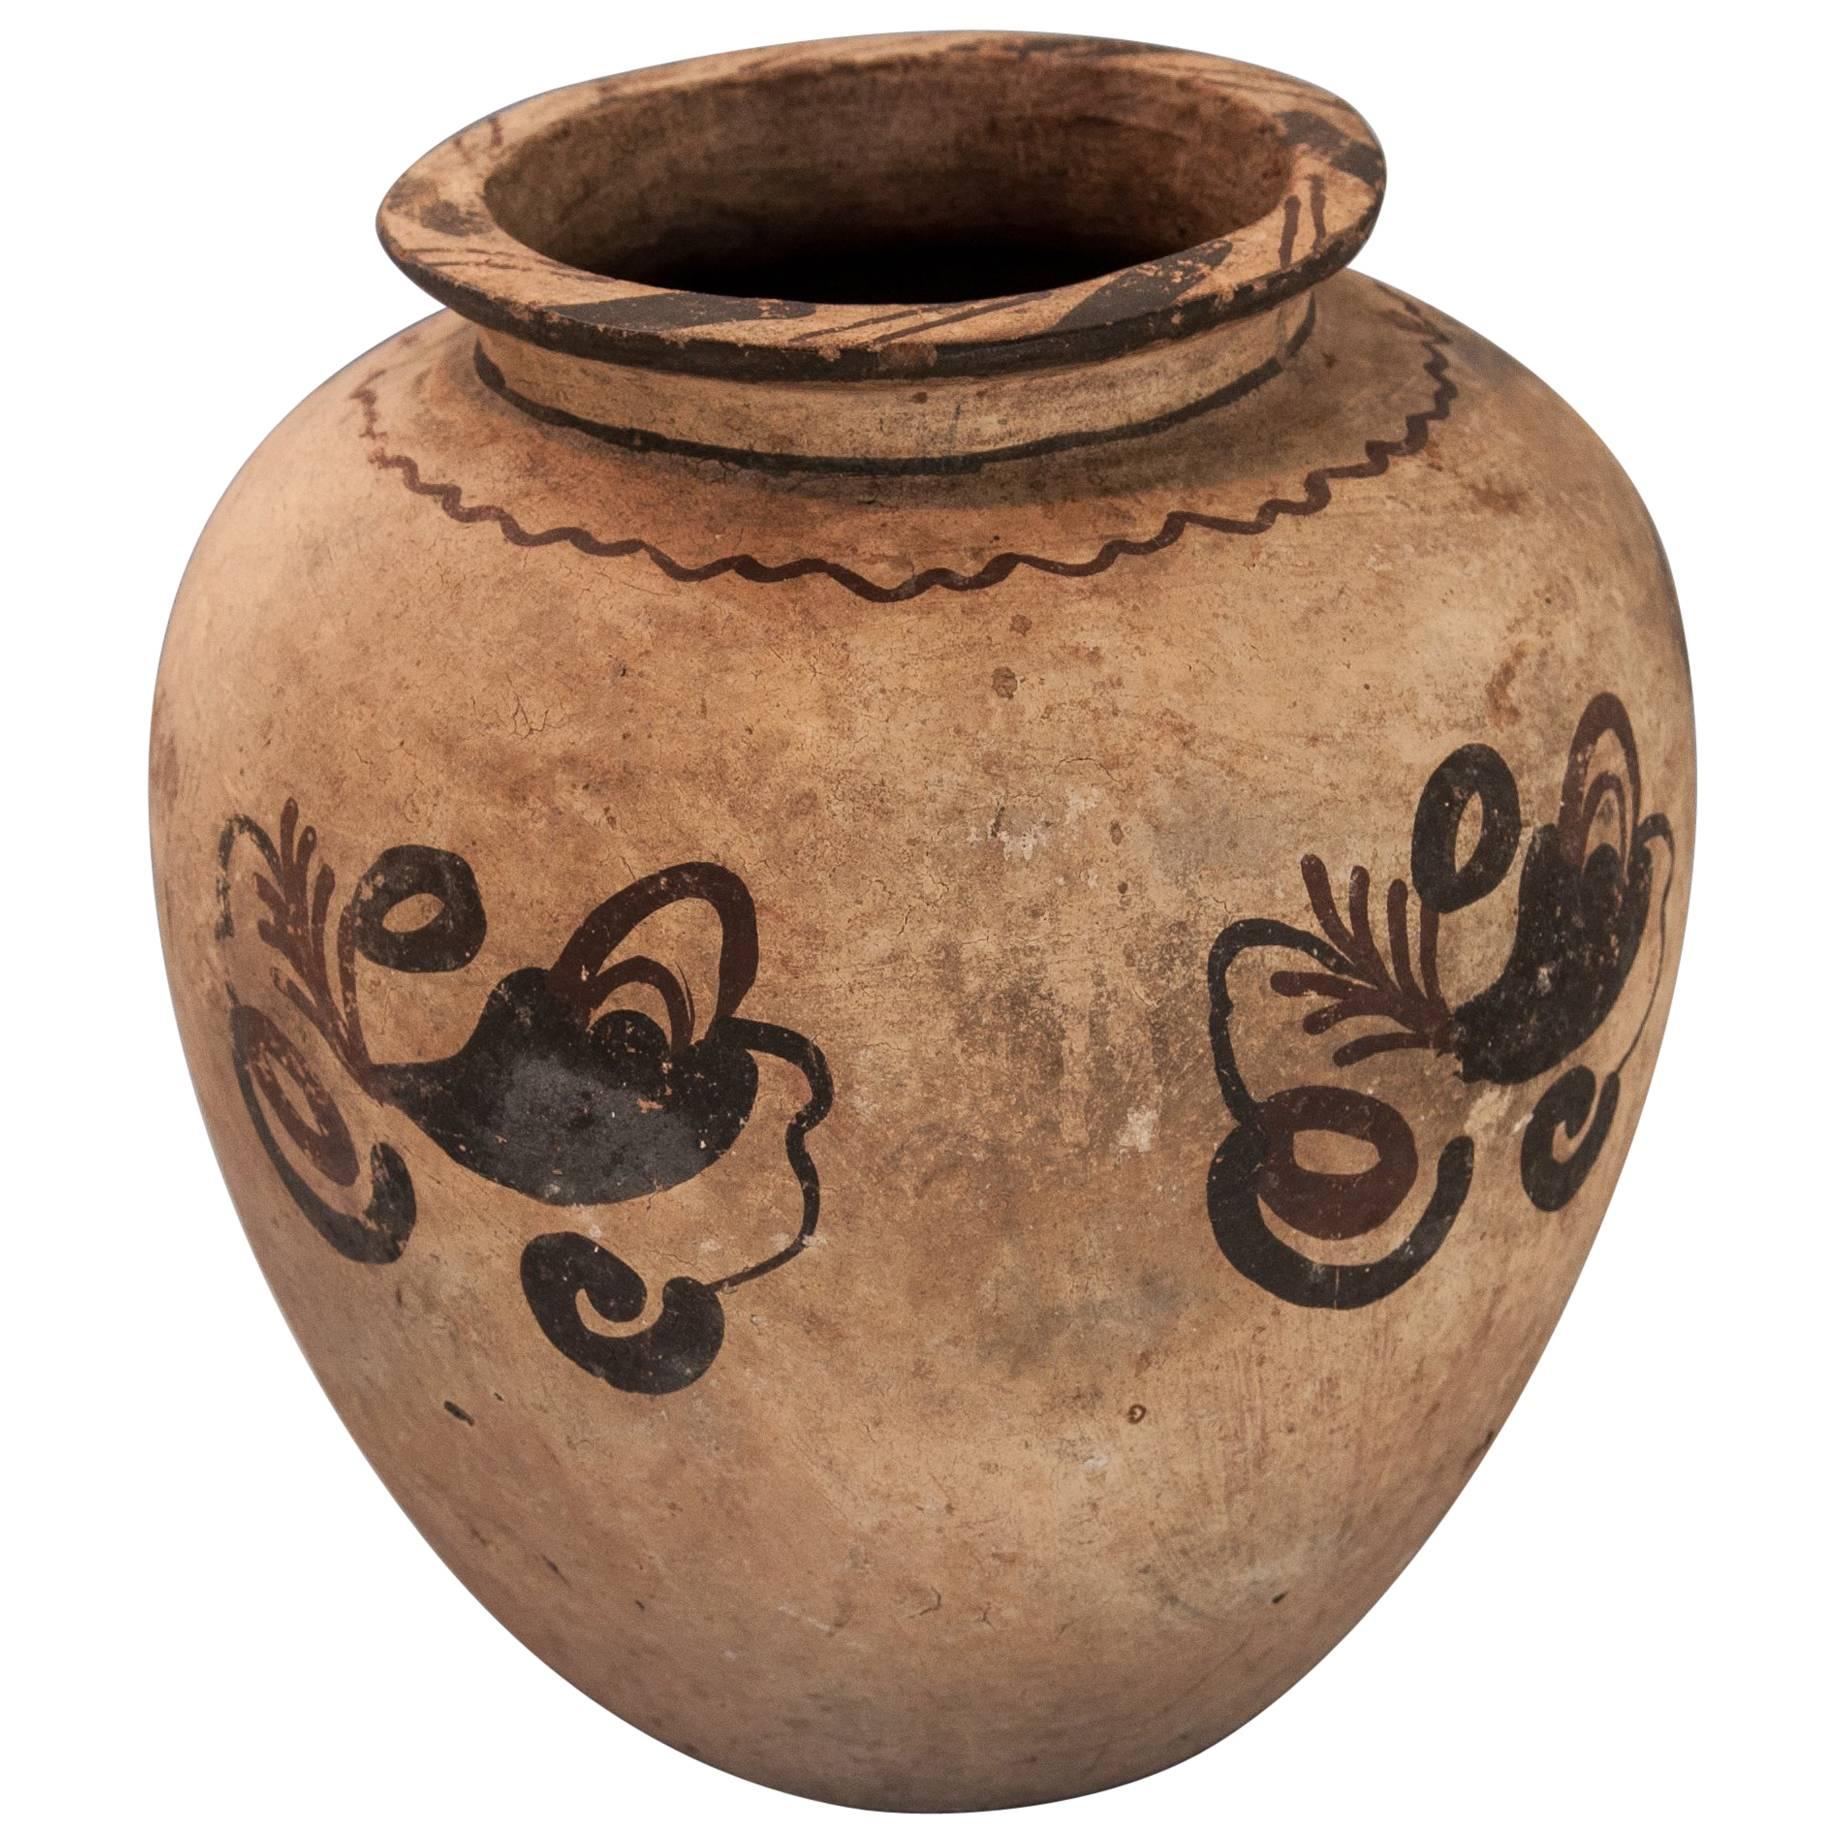 Earthenware Pot with Floral Design Mid-20th Century, Molucca Islands, Indonesia